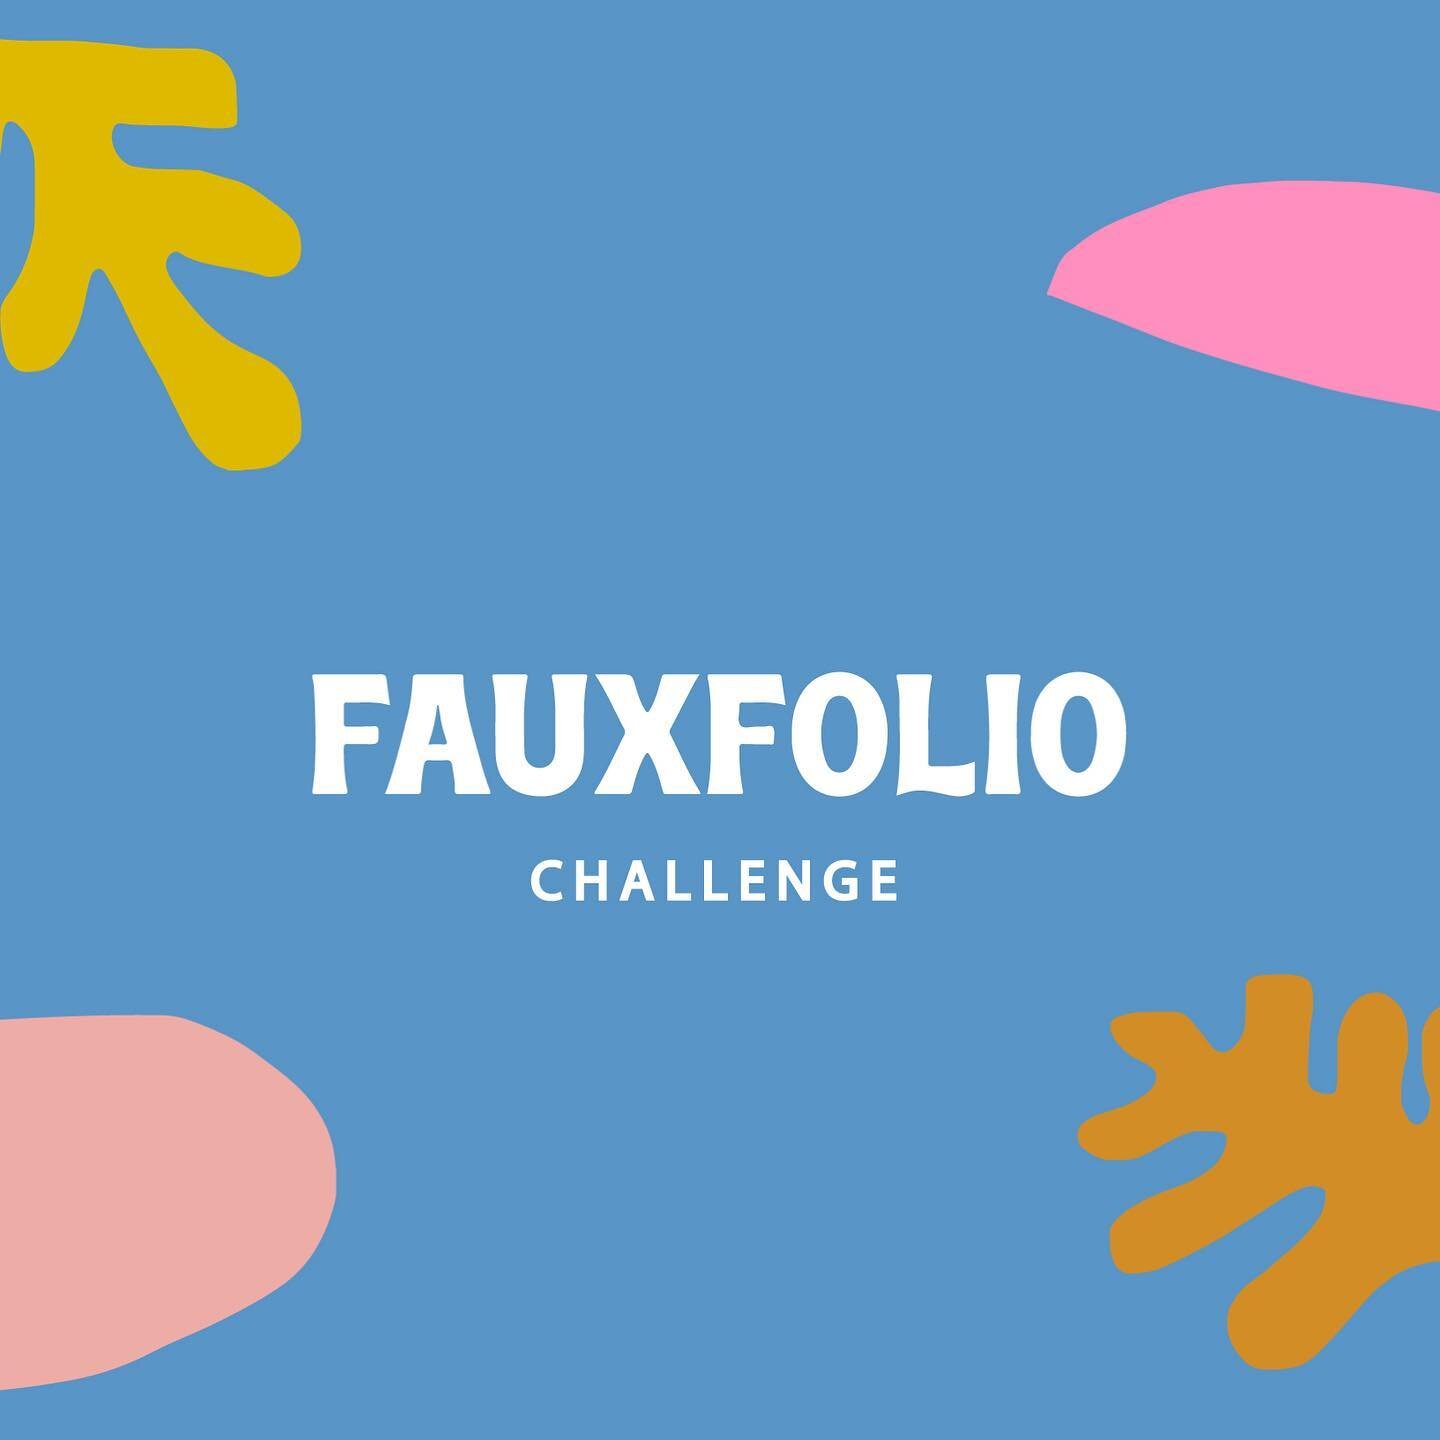 Enrollment for the FauxFolio Challenge program is quickly coming to an end (Cart closes Sunday @ midnight PST). So I wanted to share with you more about the program and our amazing guest speakers!

This program is designed to be intimate, informative